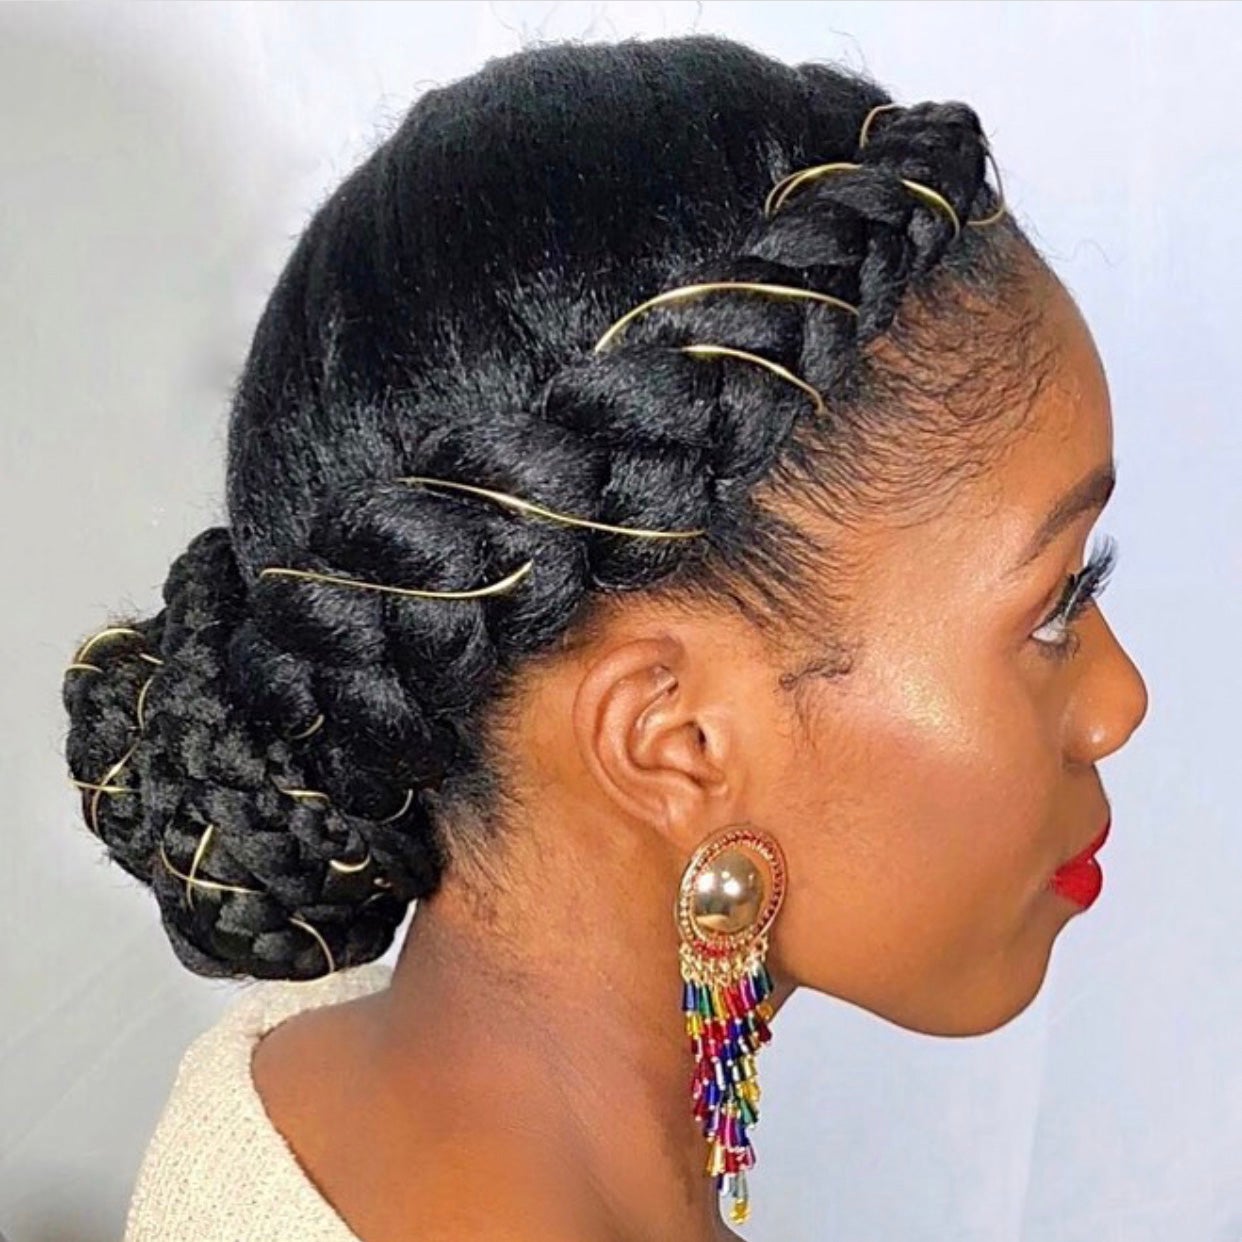 Braids are probably the best protective hairstyle, and luckily for you